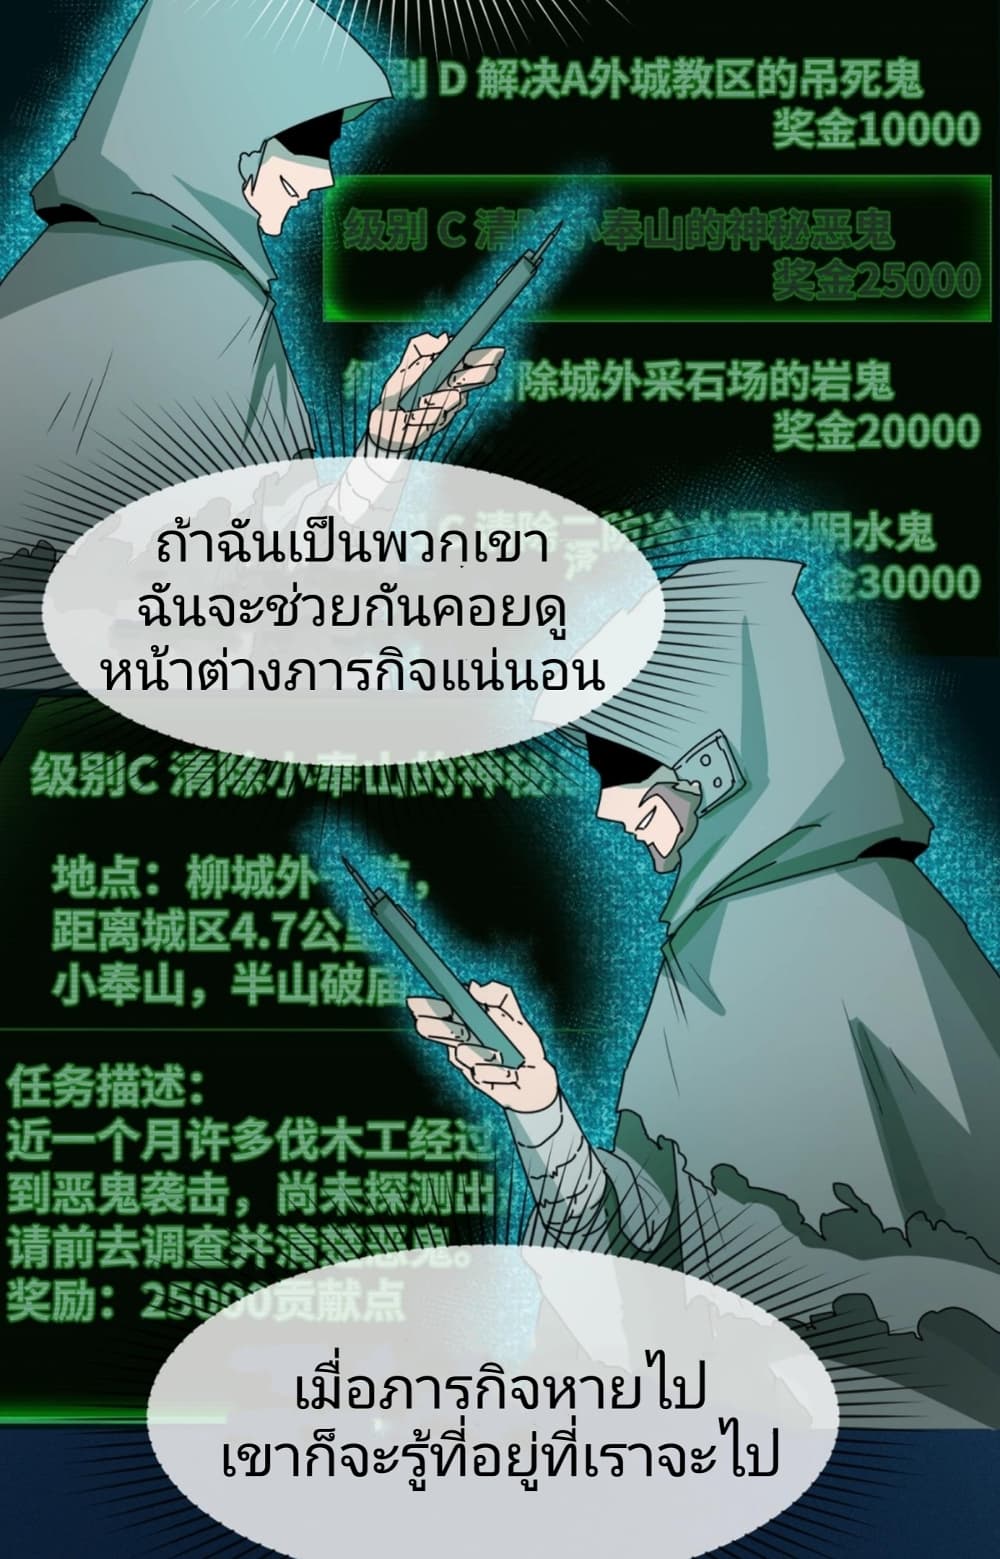 The Age of Ghost Spirits à¸à¸­à¸à¸à¸µà¹ 9 (17)